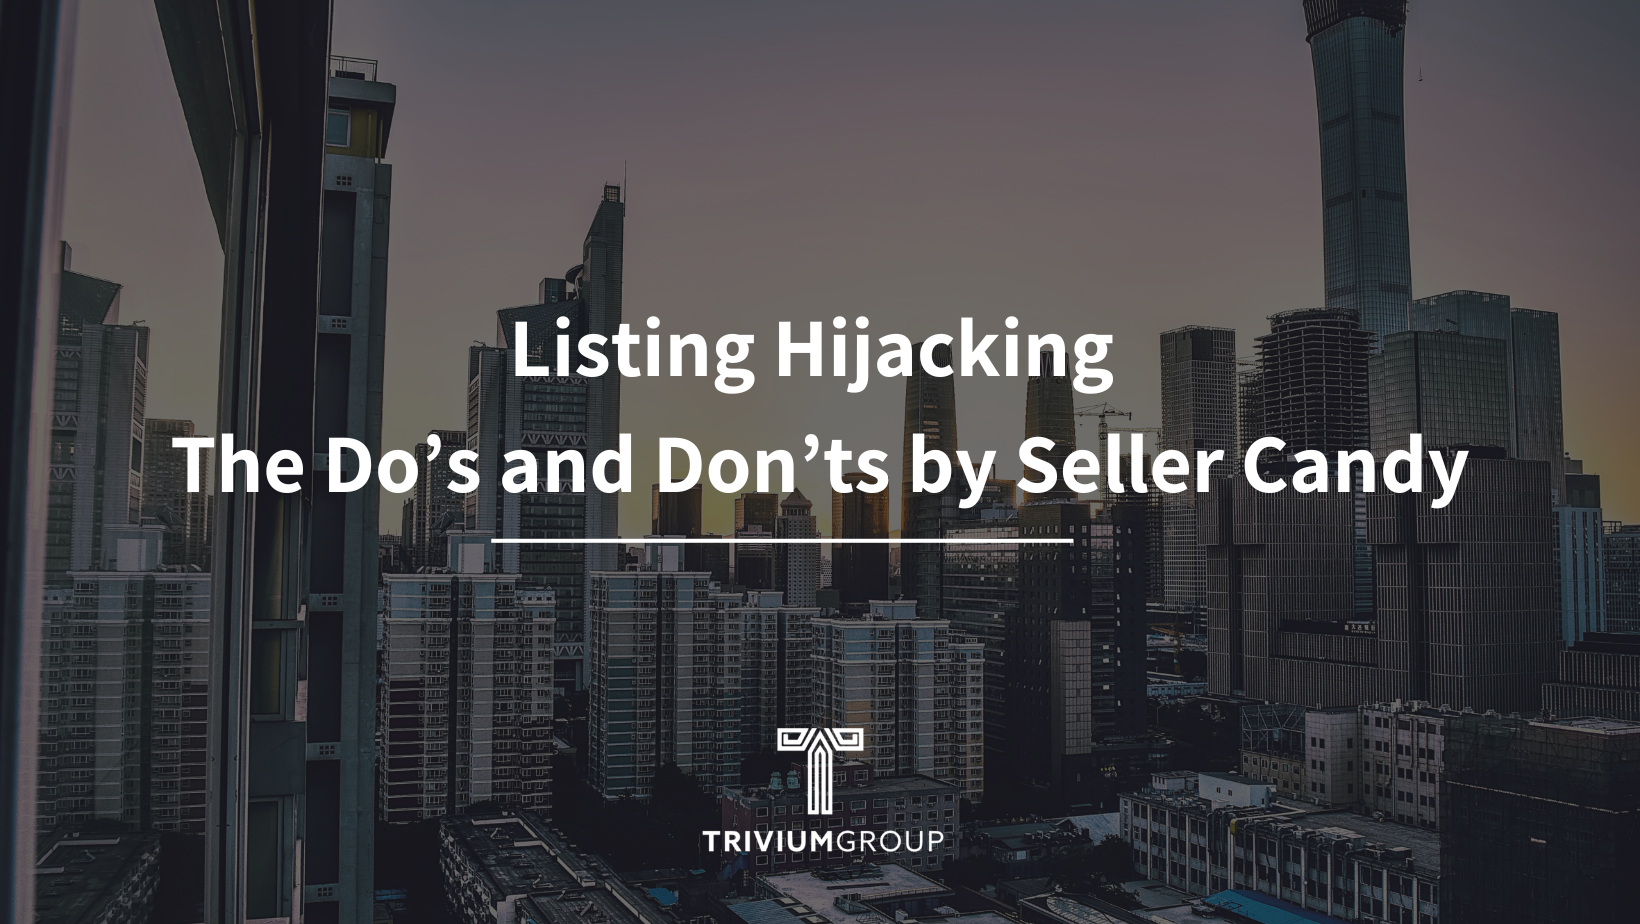 Listing Hijacking: The Do’s and Don’ts by Seller Candy